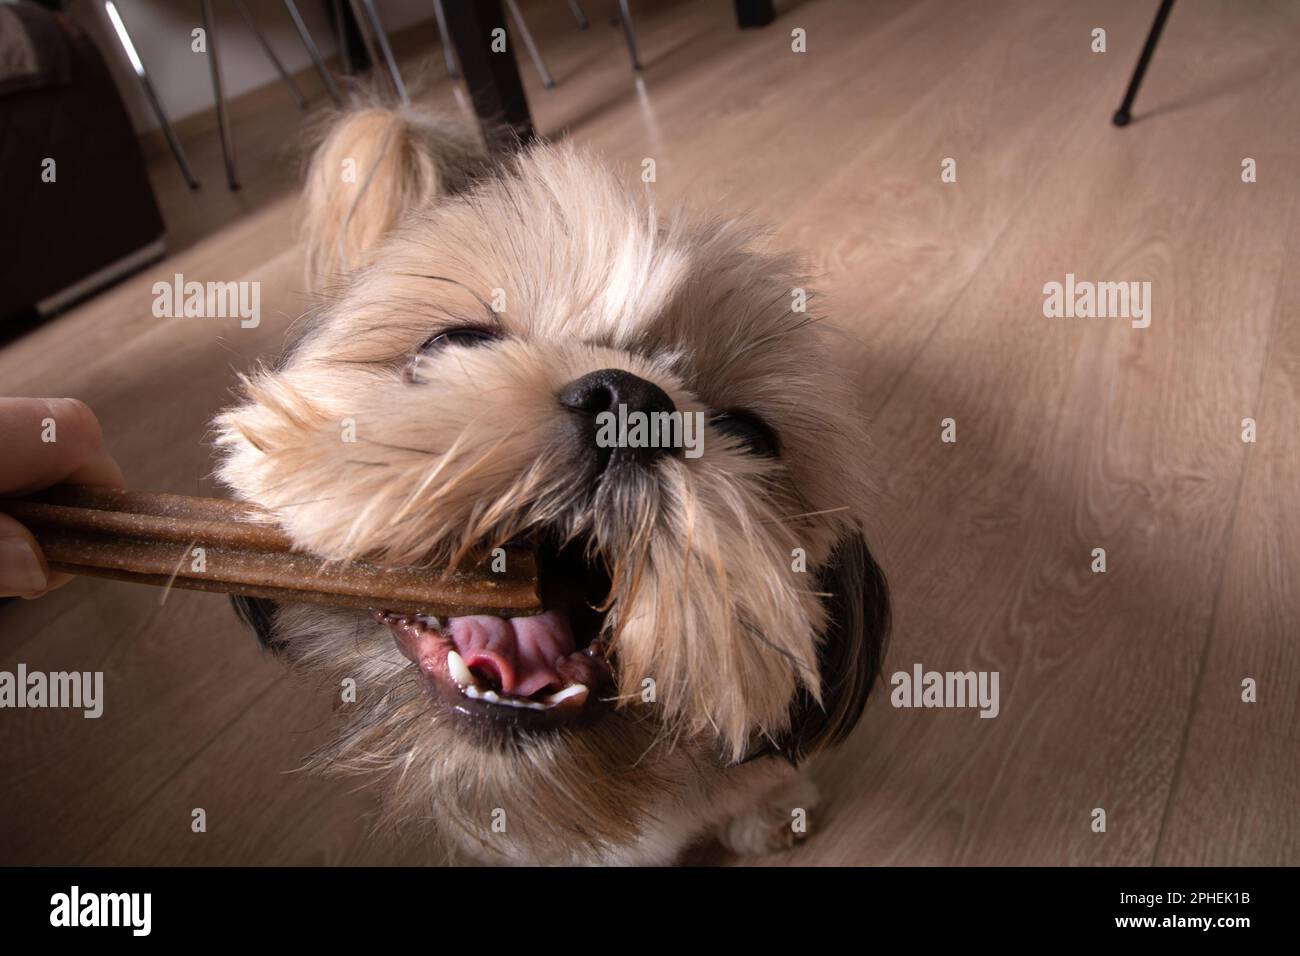 photo Shih Tzu plays with an edible stick while standing on the floor Stock Photo